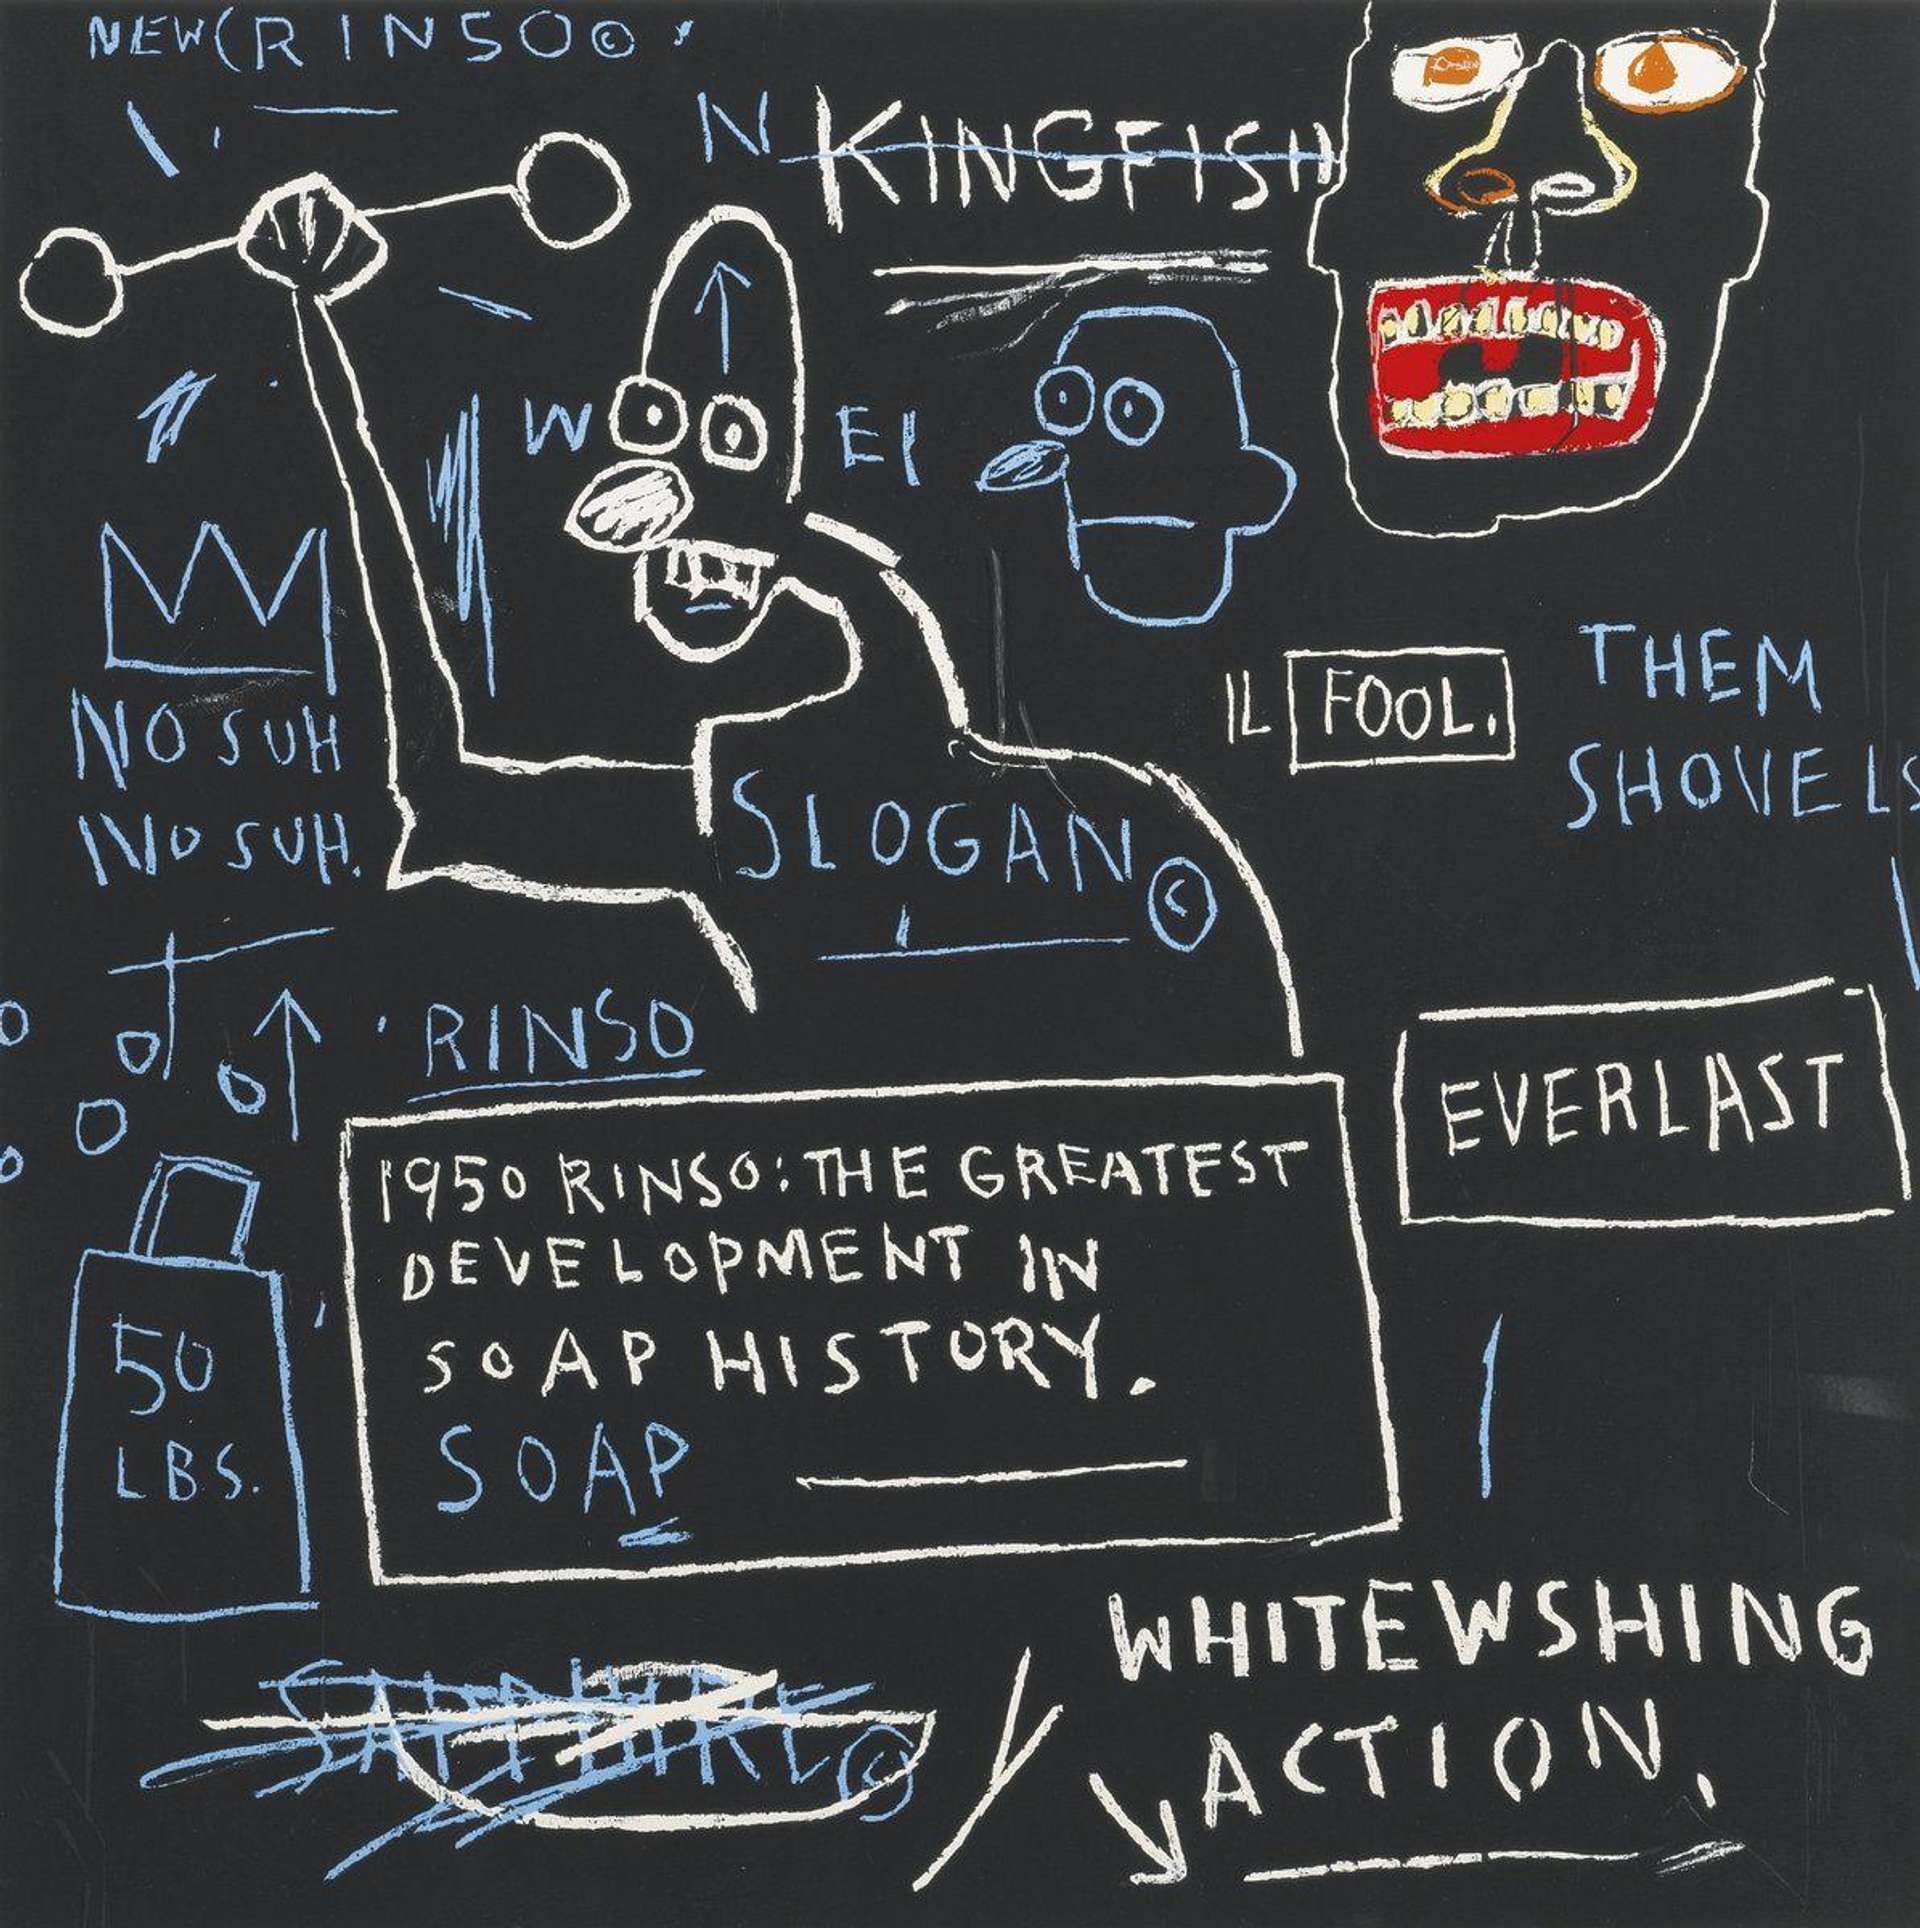 Jean-Michel Basquiat’s Rinso. A Neo-Expressionist screenprint of abstract figures and expressive faces with white and blue texts against a black background.